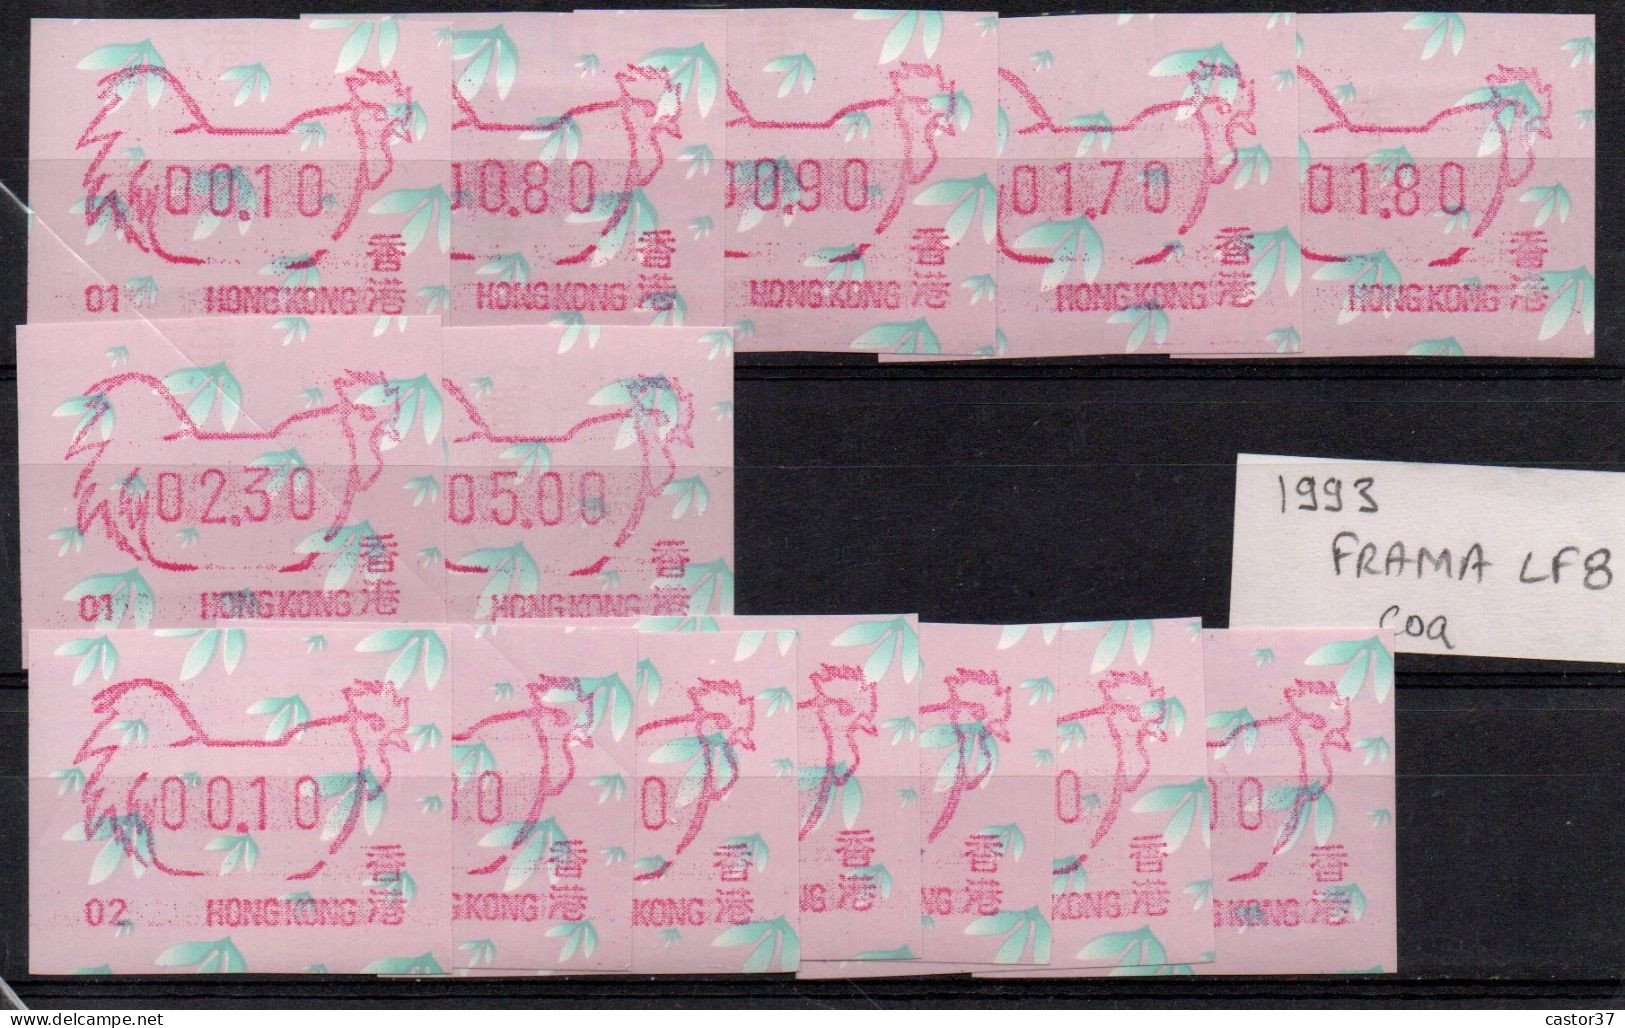 China Hong Kong Machine Label Frama 1993 Cock Machine 01 And 02 Complet Set Free Postage - Unused Stamps